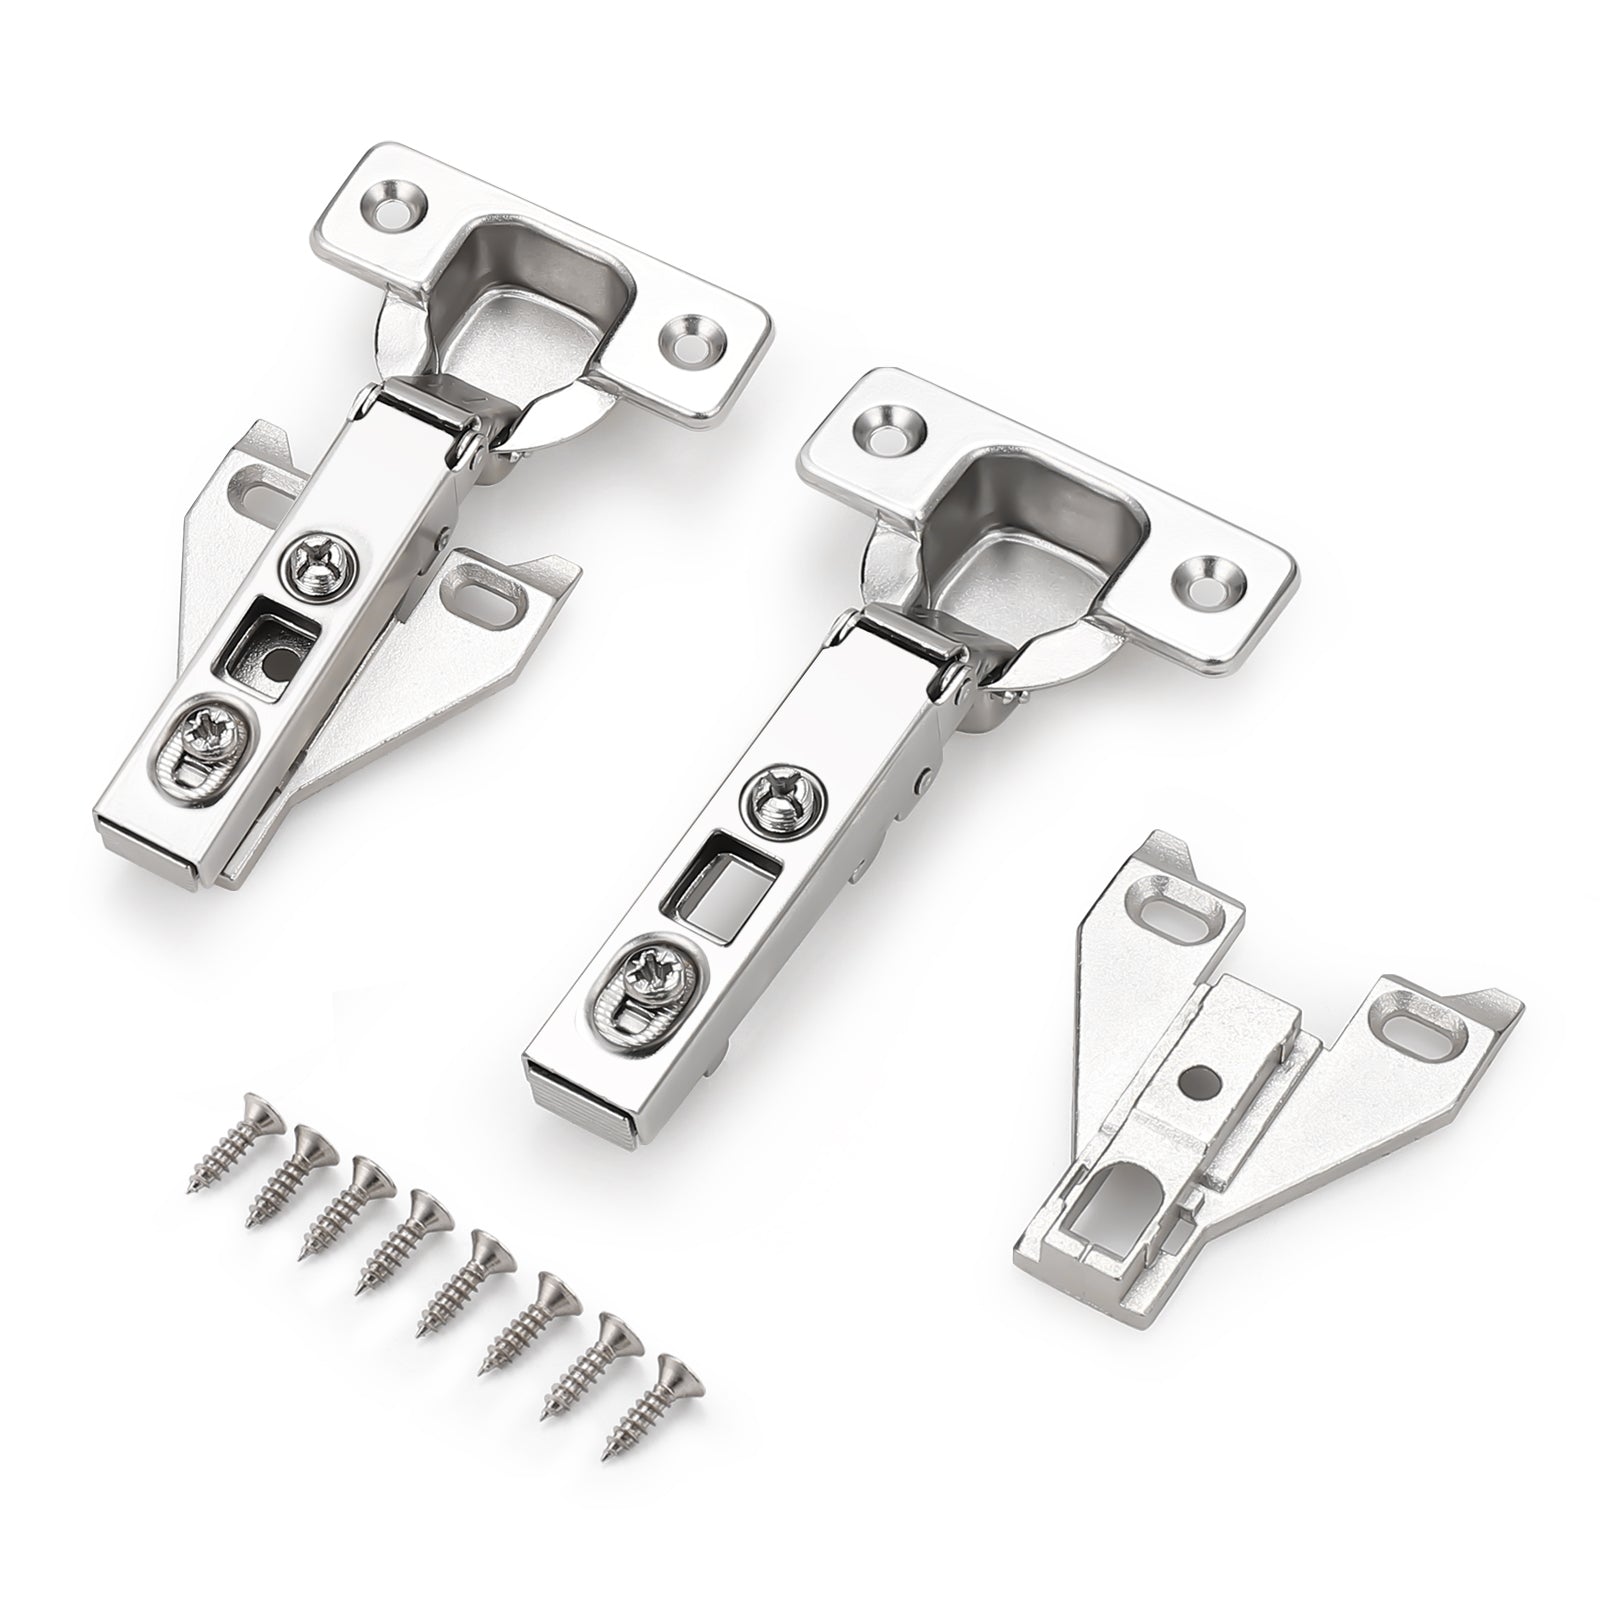 Probrico CHHS09 Clip On Face Frame Mounting Concealed Cabinet Hinges - Probrico